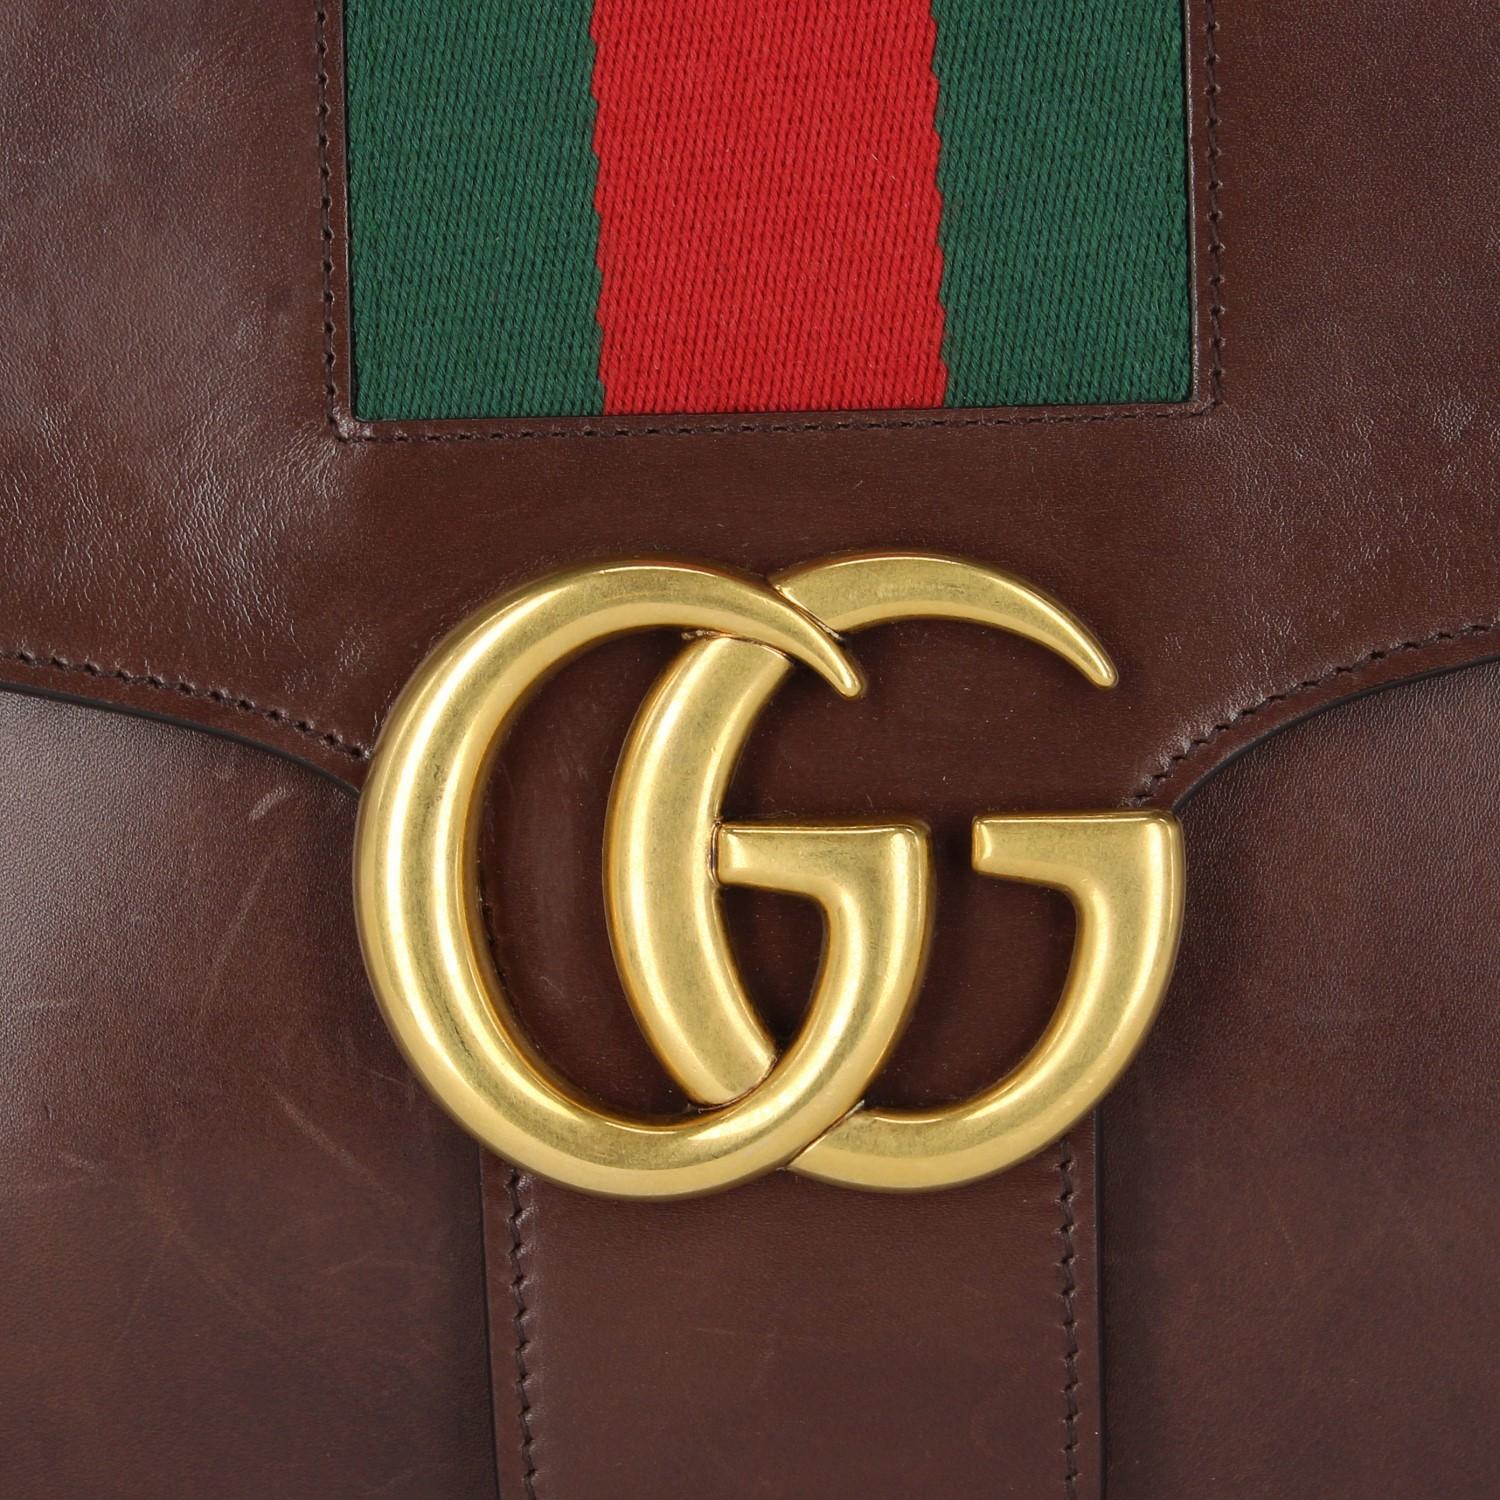 2000s Gucci Brown Leather Bag 2